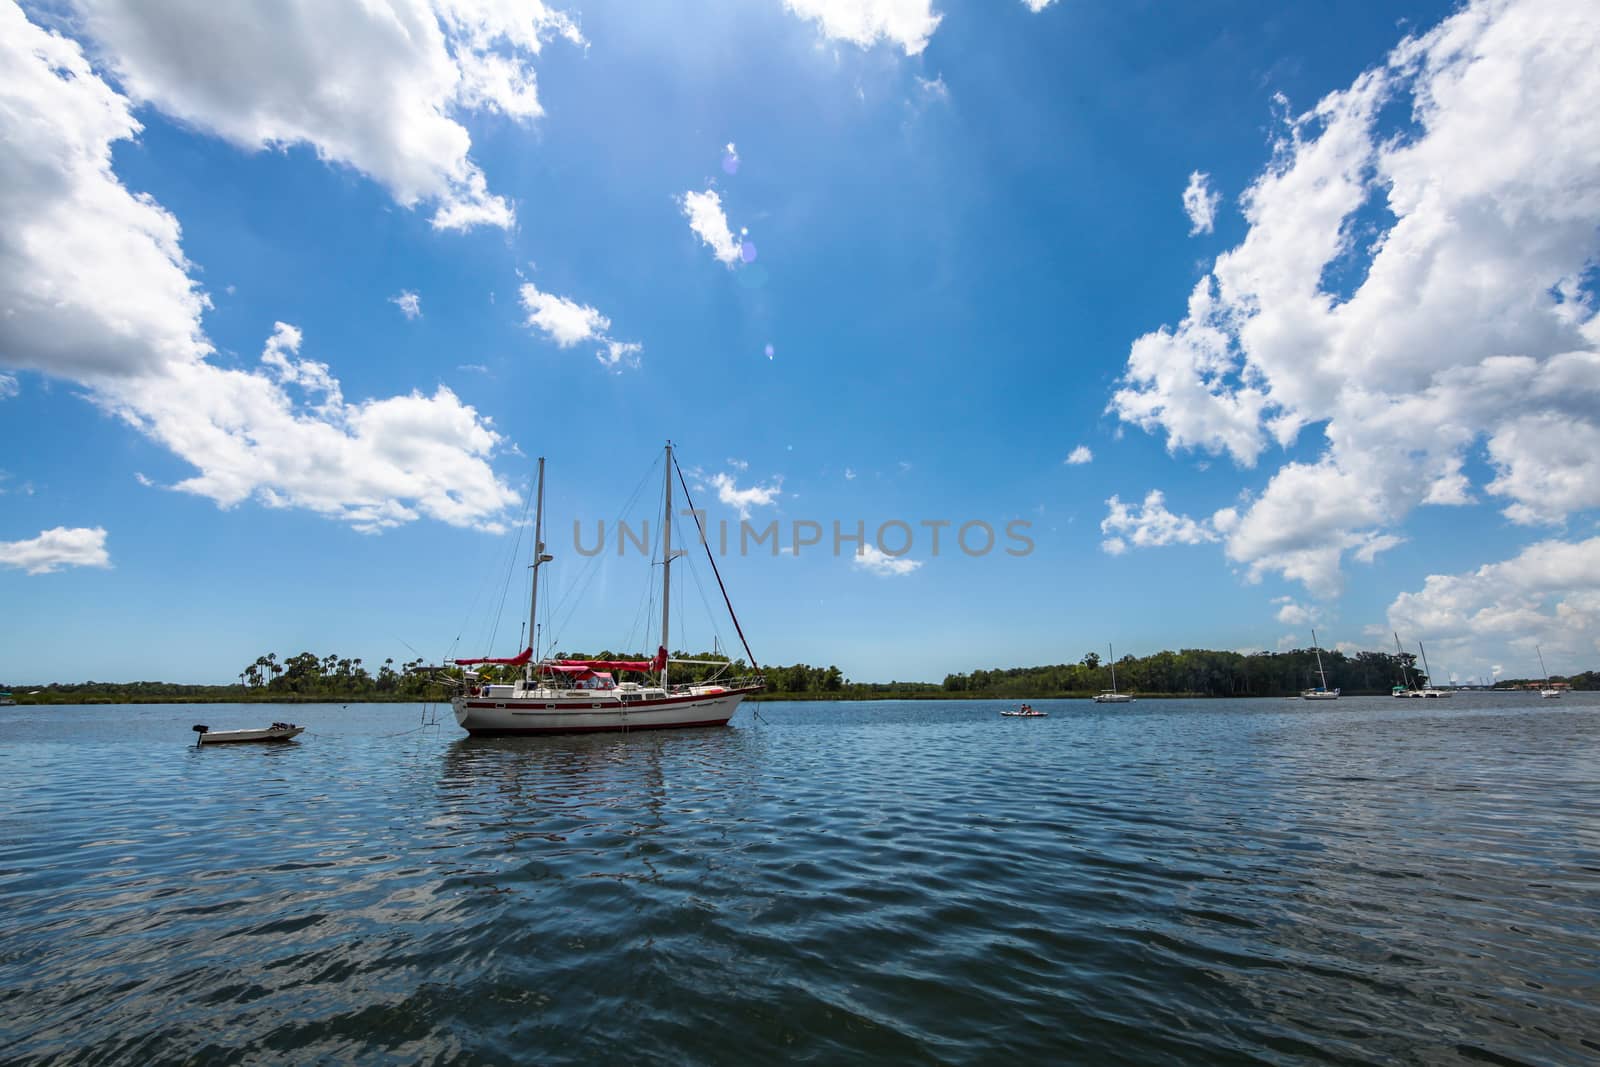 A sail boat on a lake with island behind